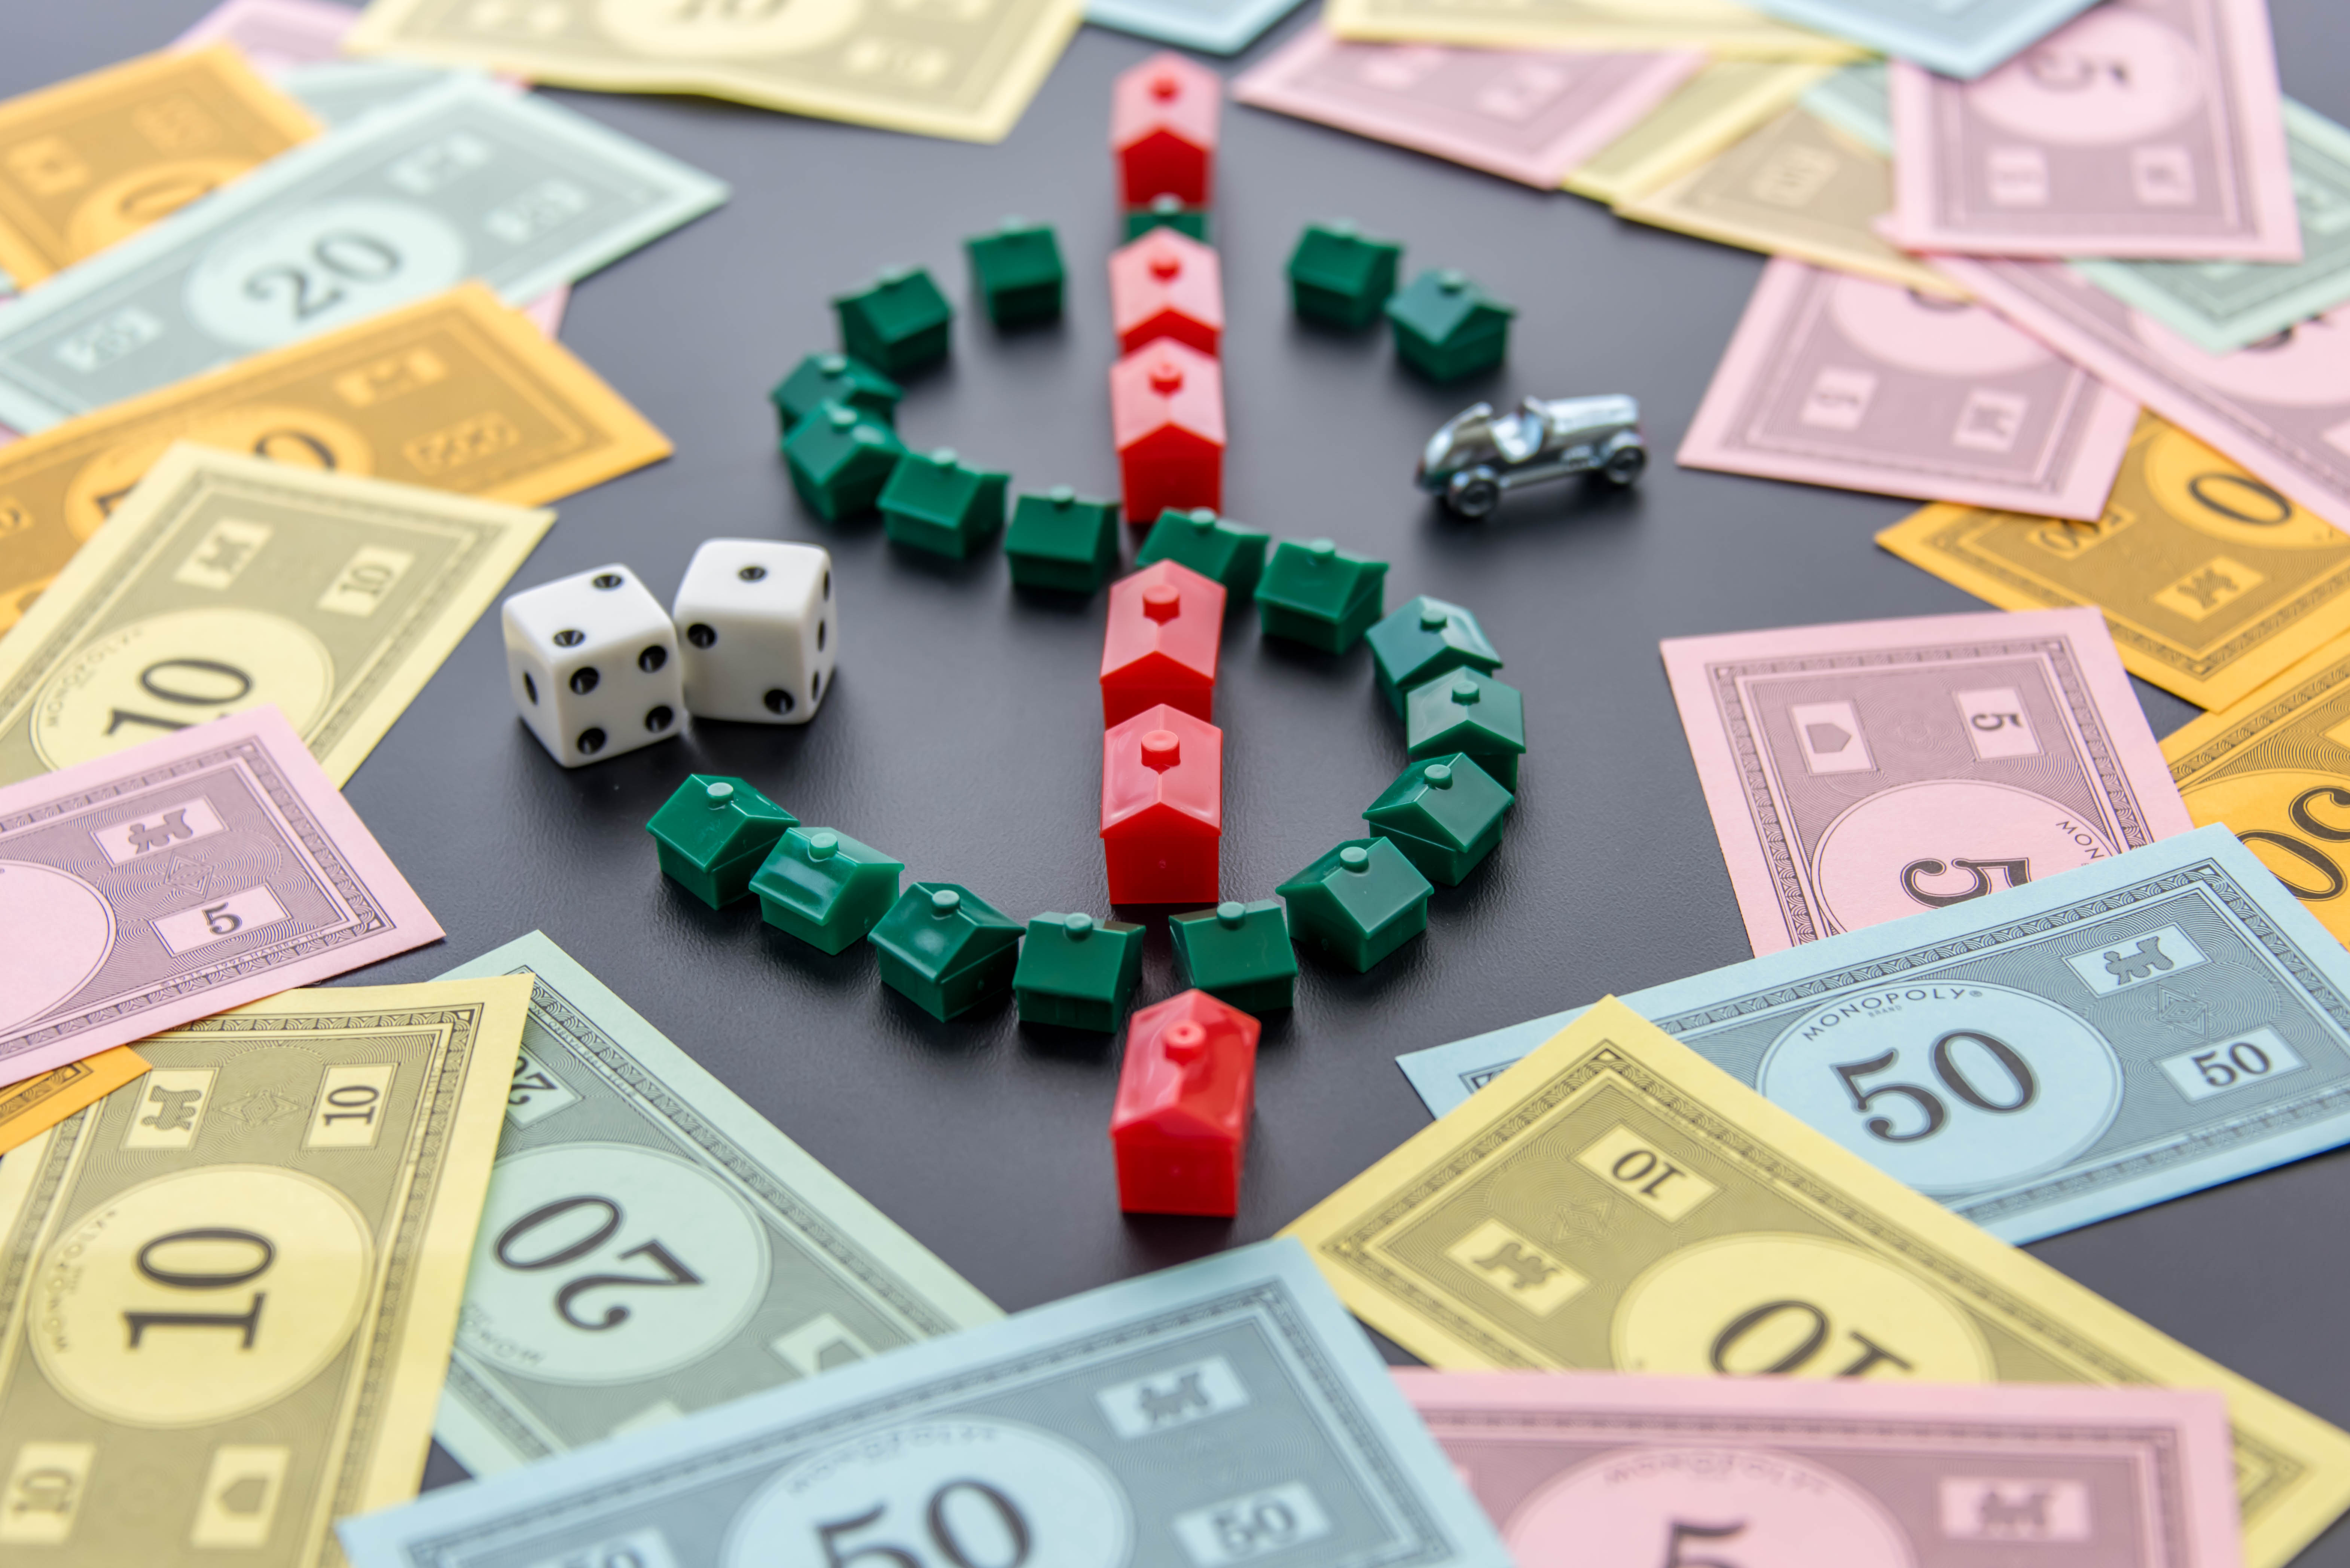 A dollar sign created by Monopoly game houses is surrounded by Monopoly money Dice and the car token appear next to the doll